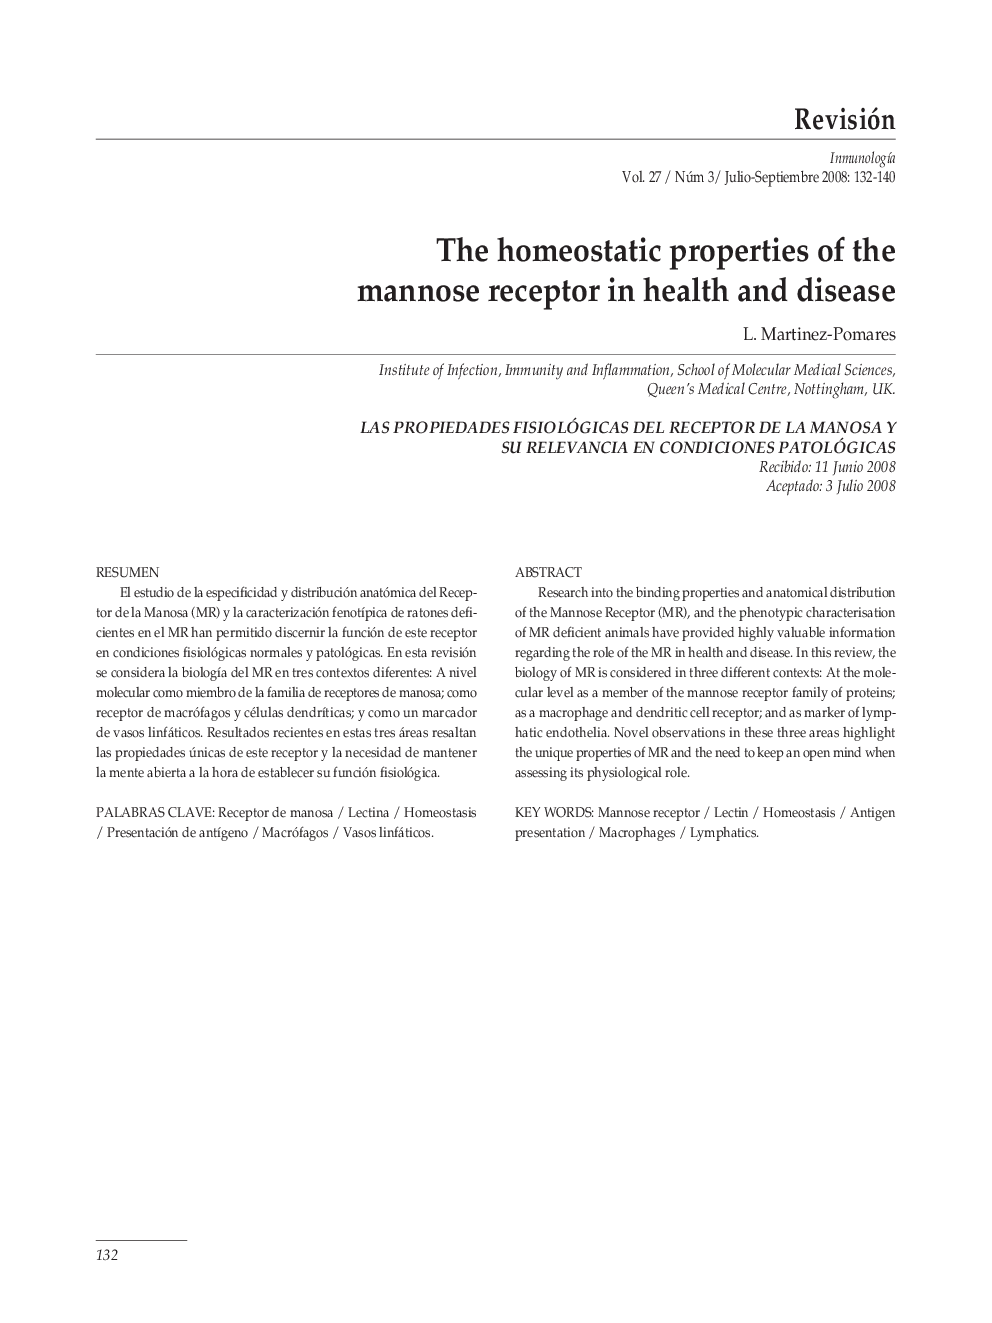 The homeostatic properties of the mannose receptor in health and disease